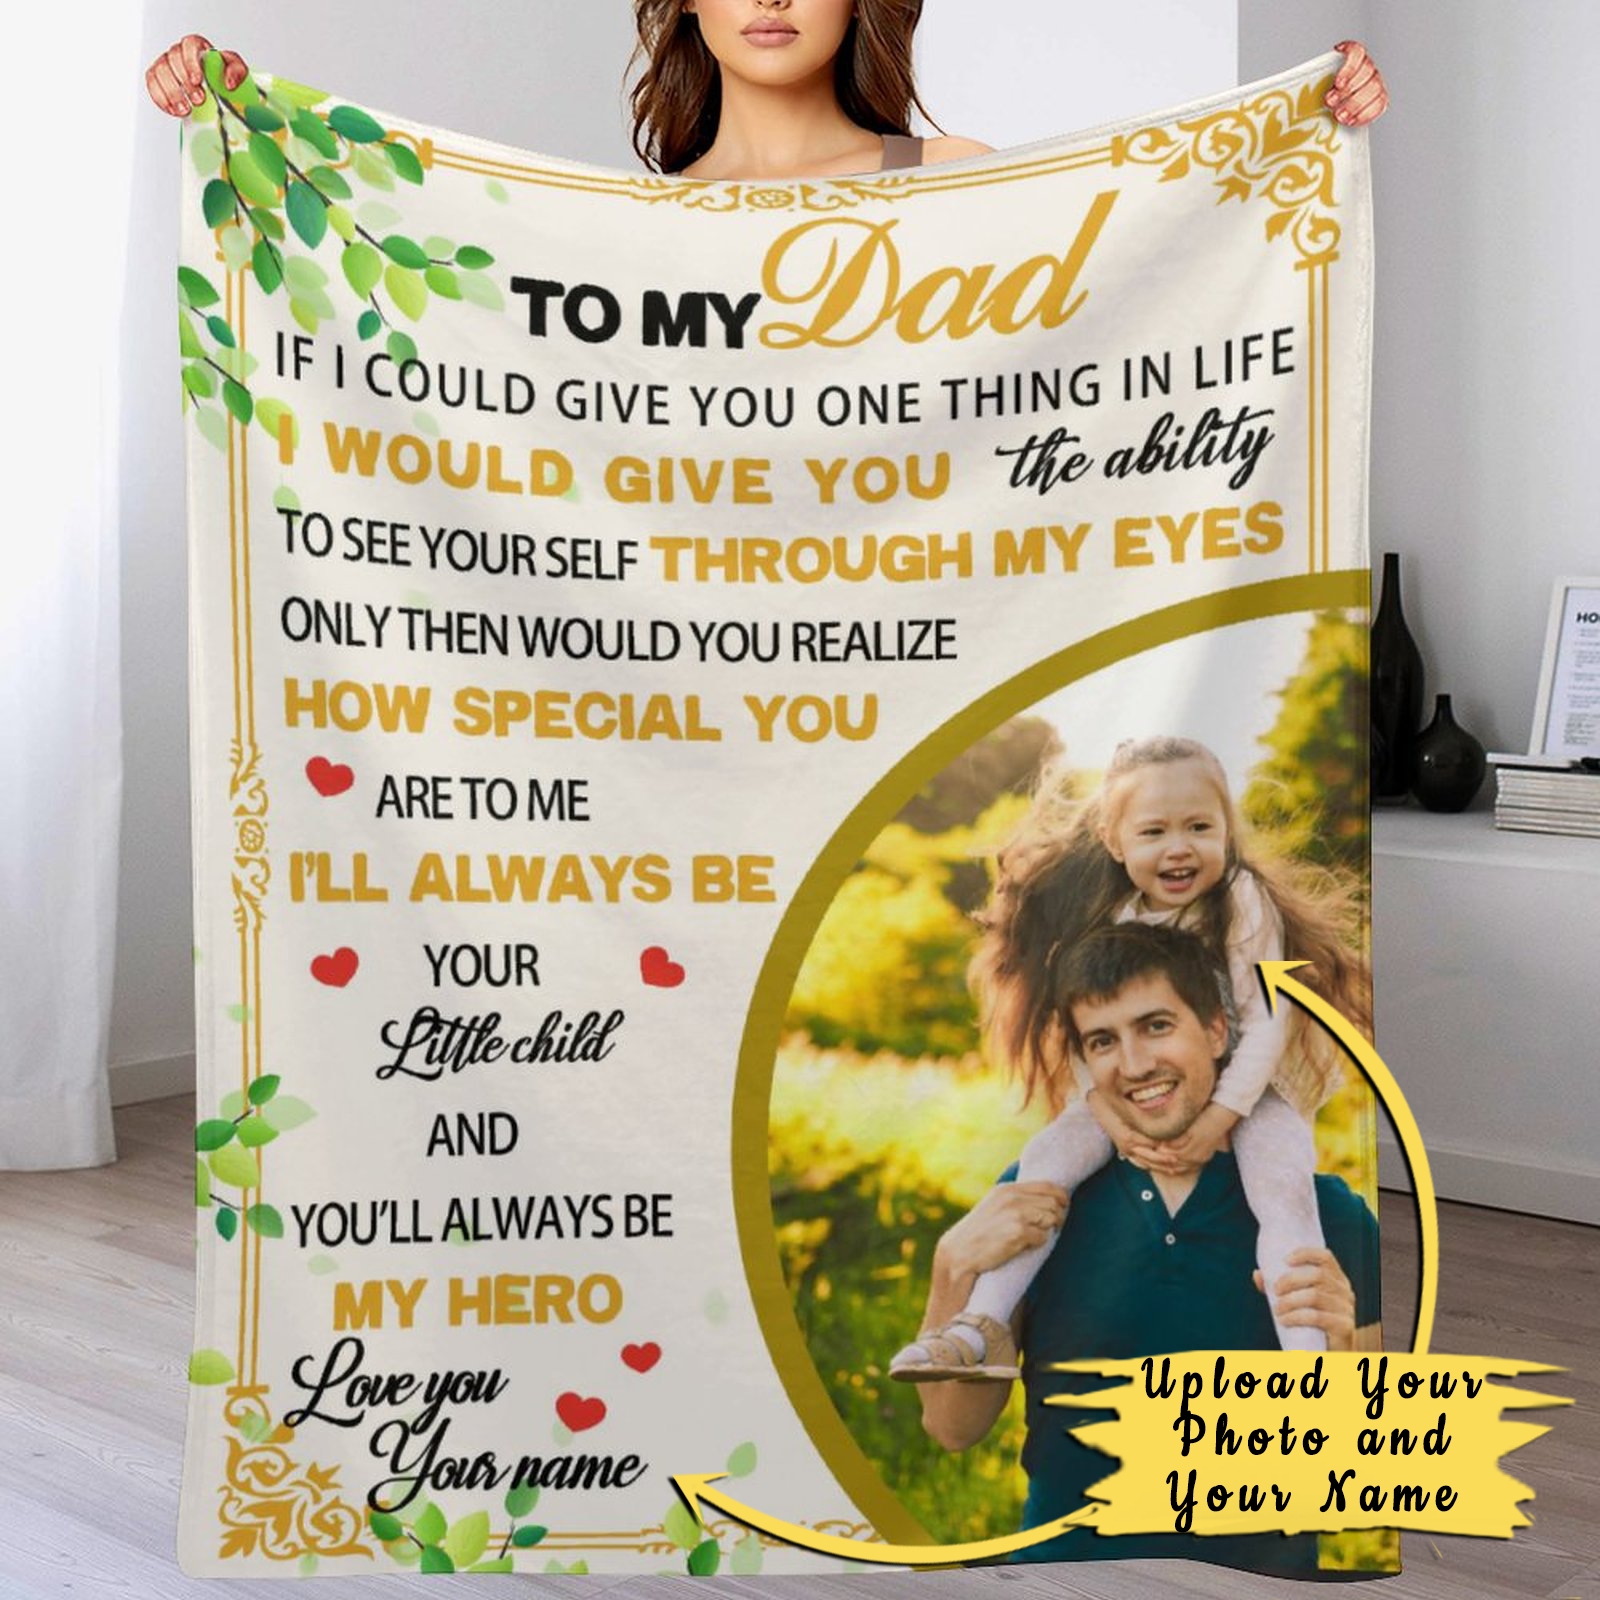 Personalized Blanket for Father's Day, To My Dad Blanket, Dad Photo Blanket, Fathers Day Gifts, Dad Blanket, Family Blanket, Blanket for Dad